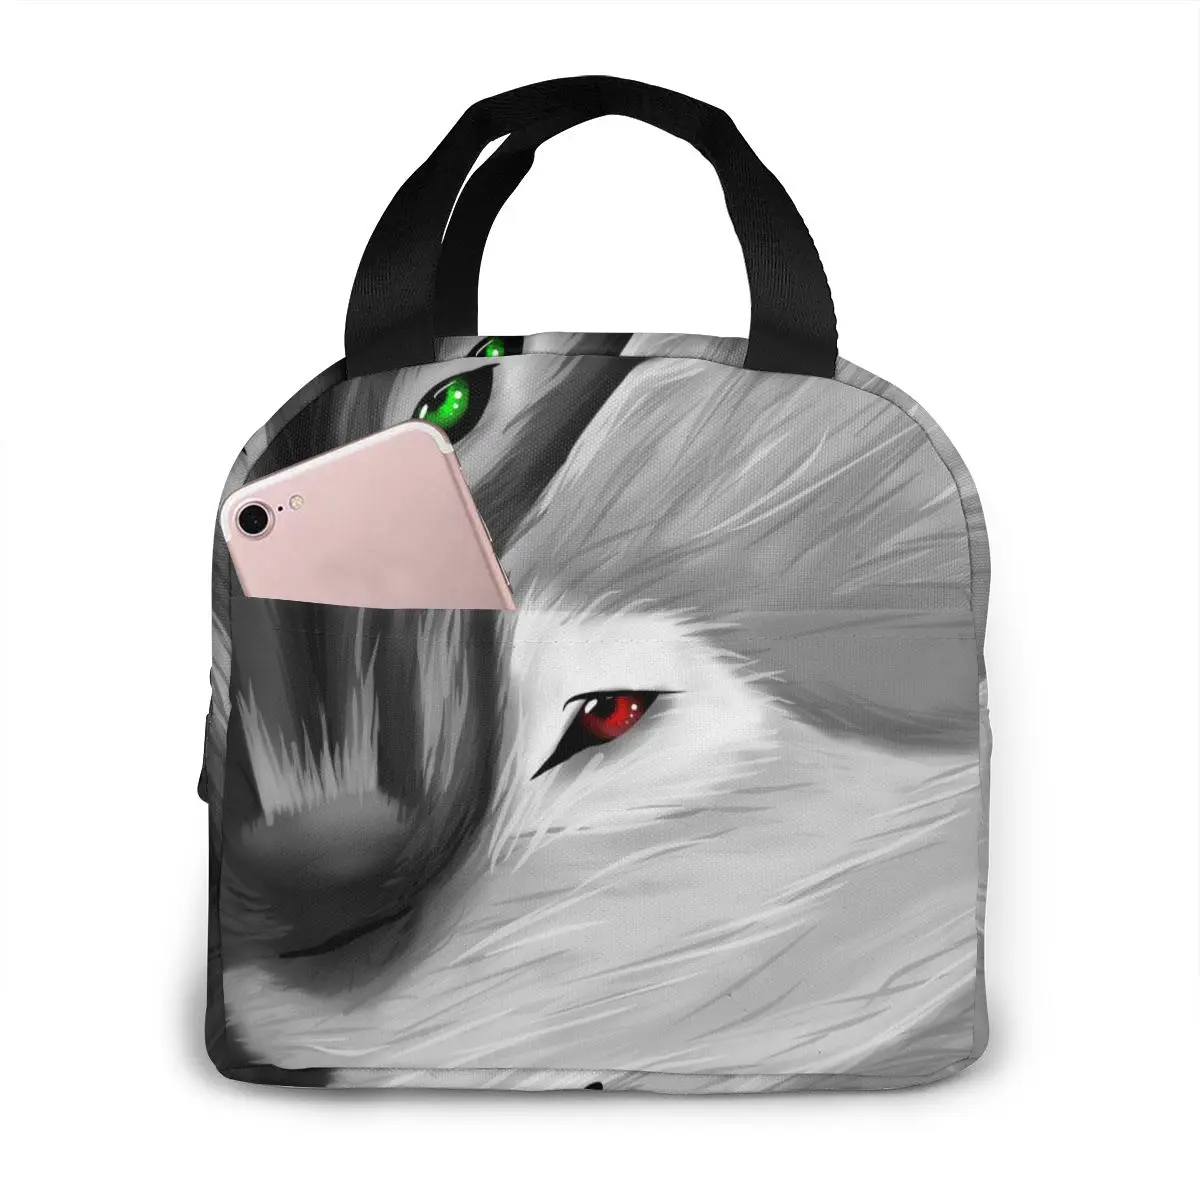 

Portable Lunch Bag Black White Wolves Thermal Insulated Lunch Box Tote Cooler Bag Bento Pouch Lunch Container Food Storage Bag